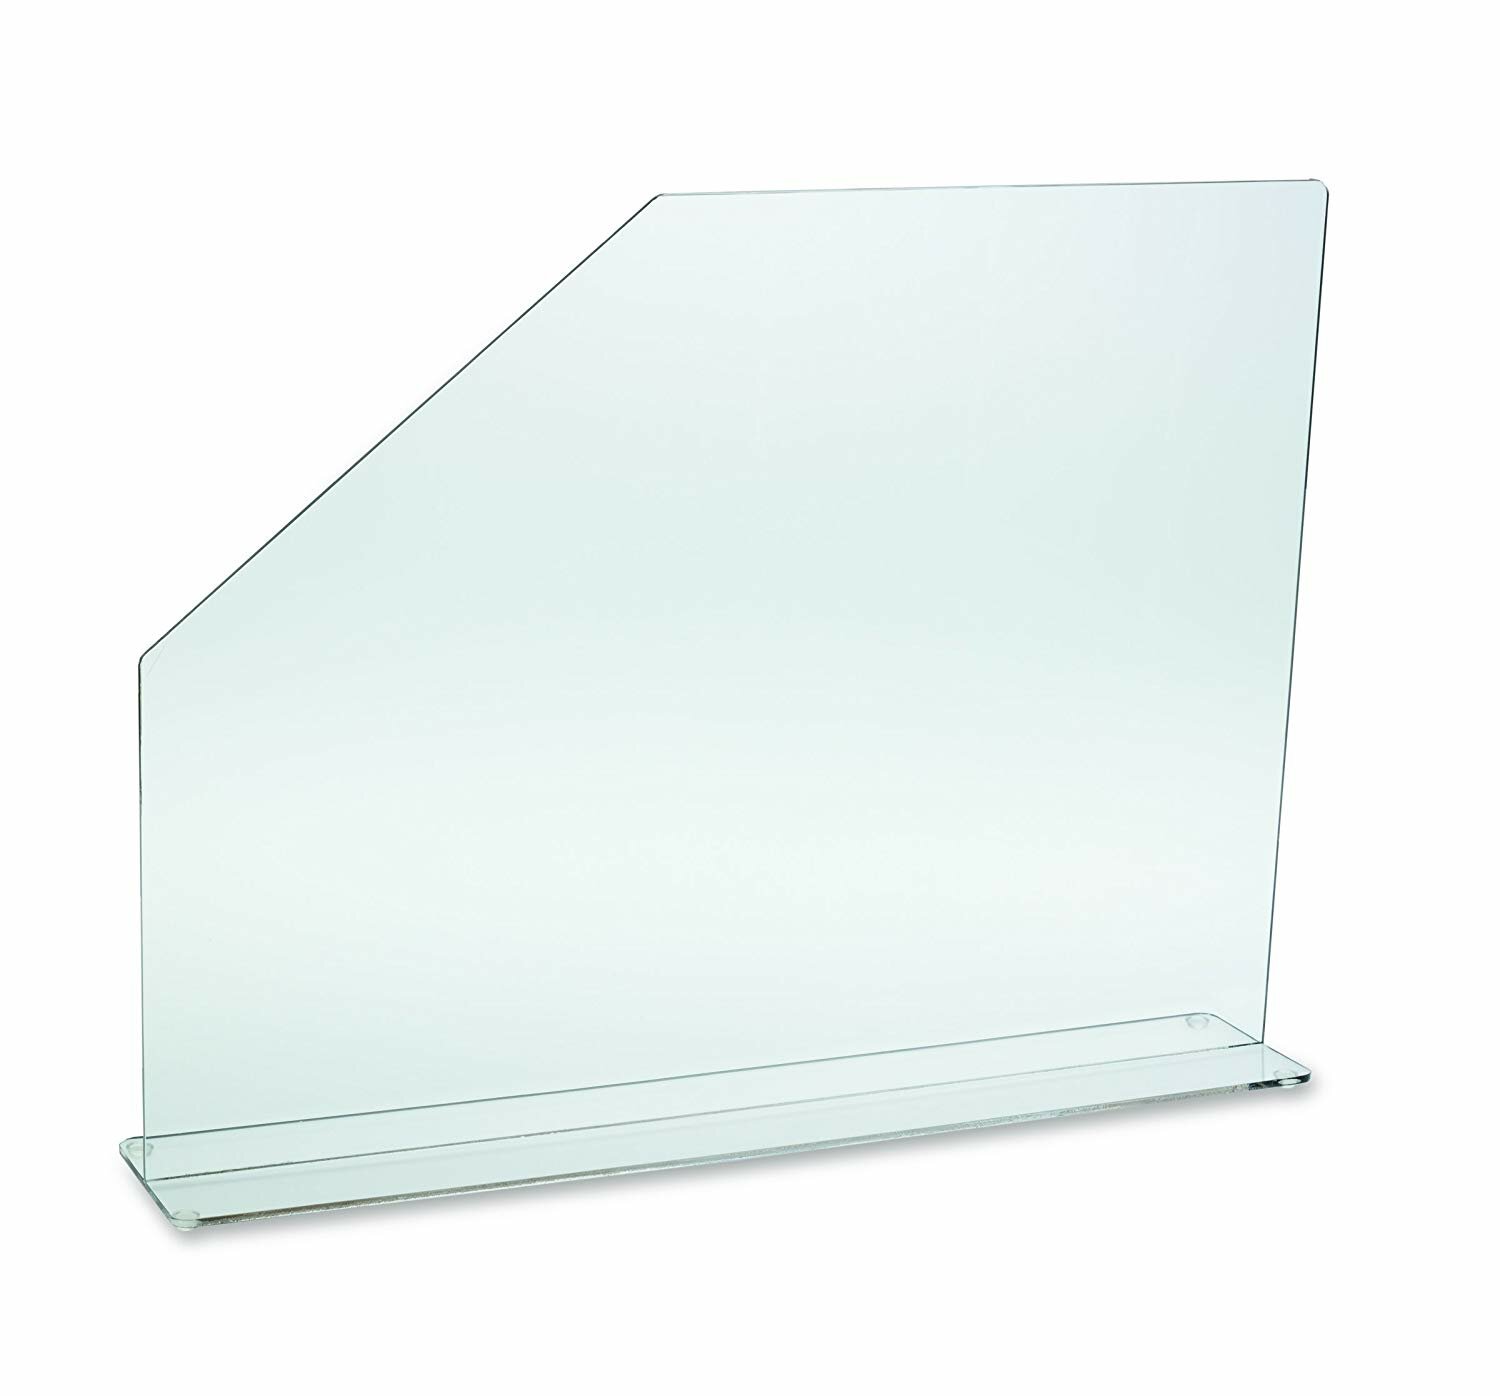 Heavy Duty Clear Vinyl Separation Divider Panel - Emergency Relief Supplies